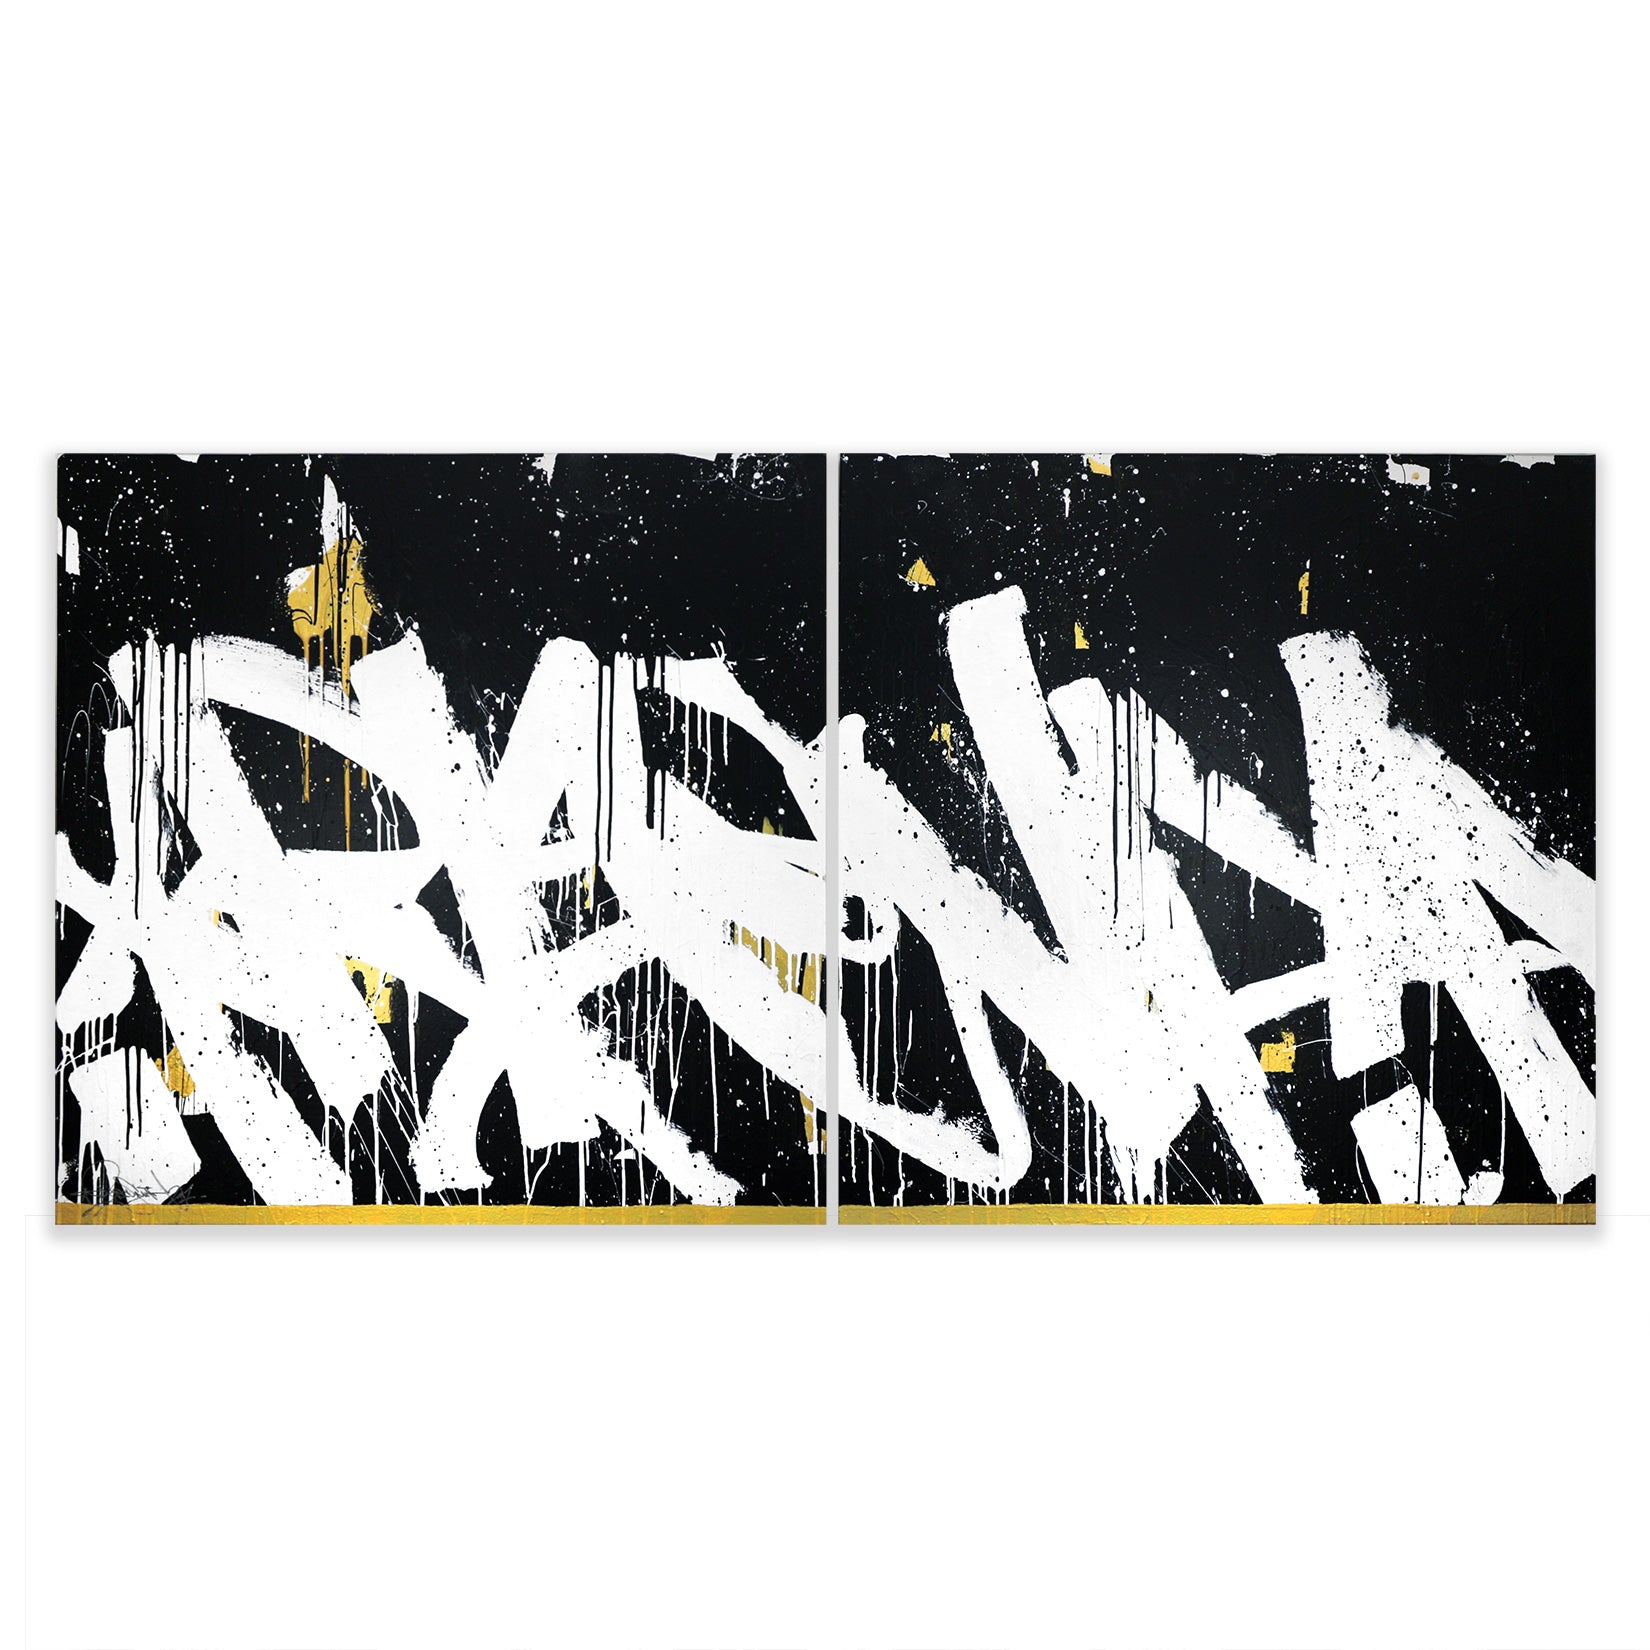 RISE (DIPTYCH) - 80X40 - Bisco Smith